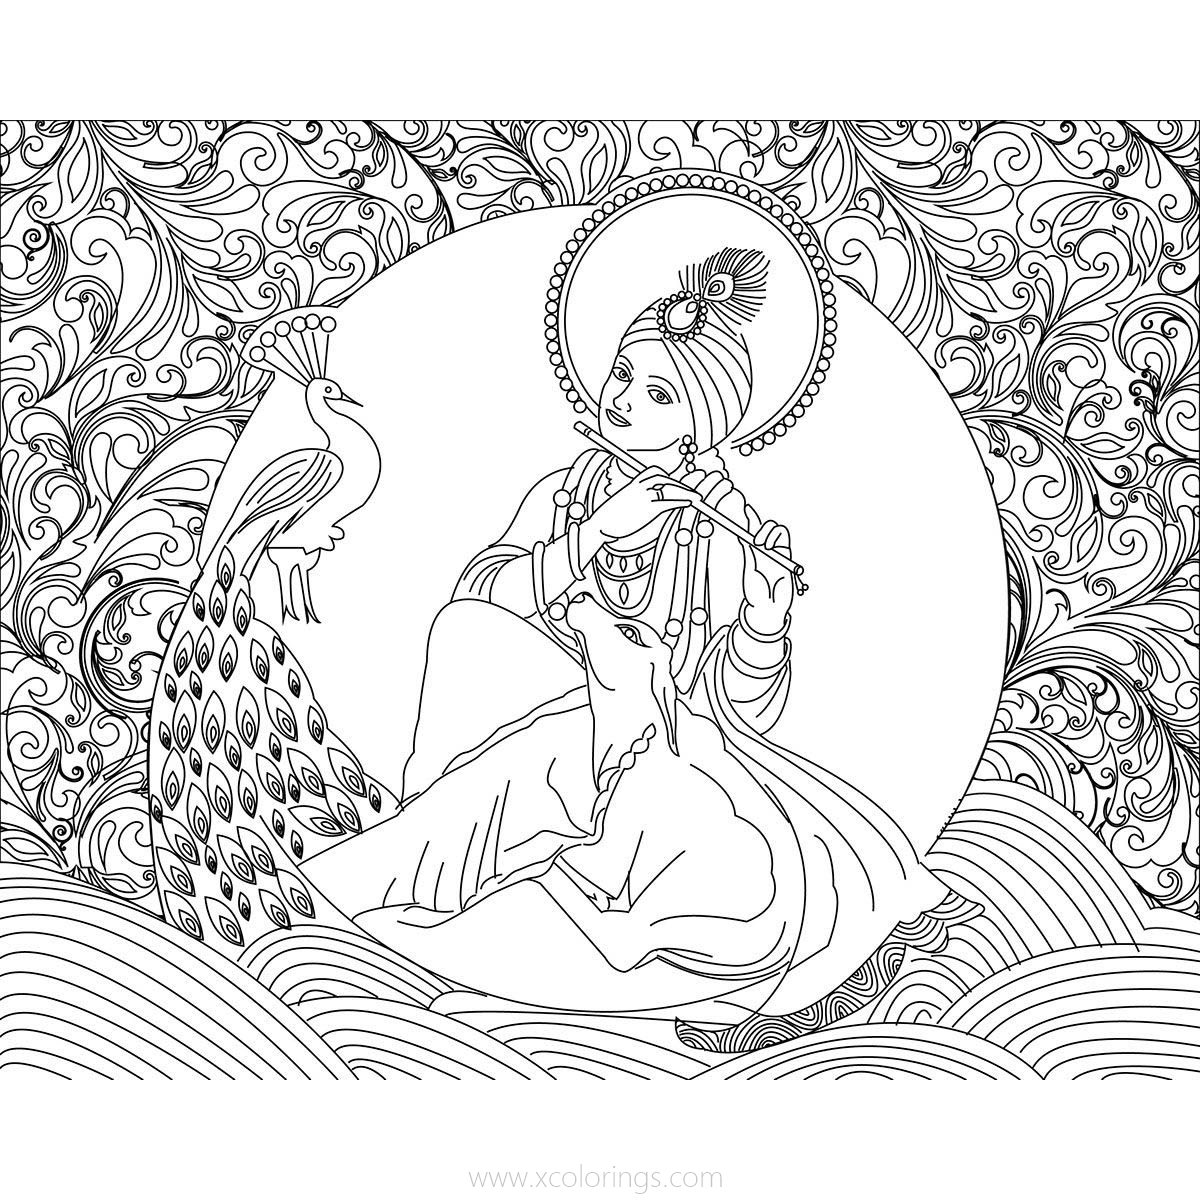 Free Krishna Coloring Pages for Adult printable